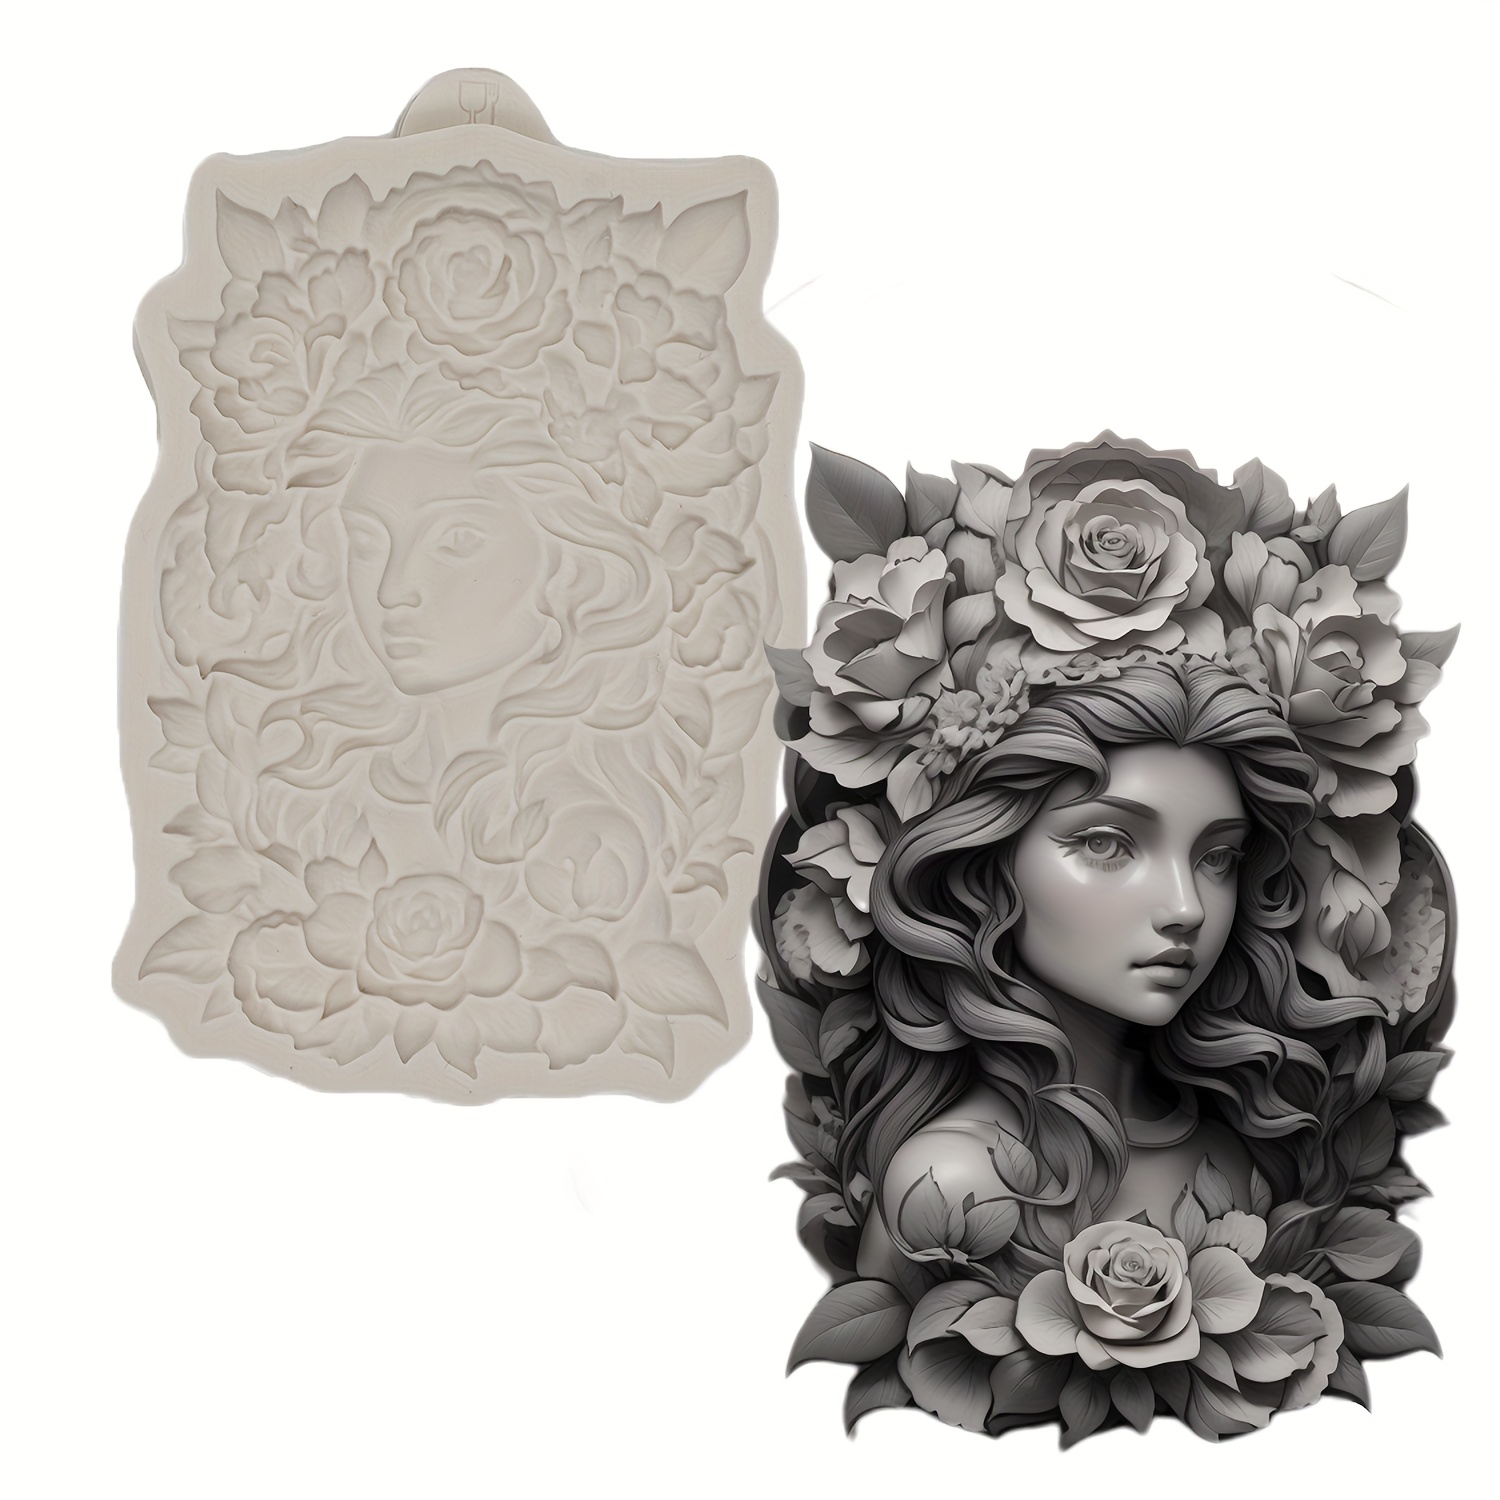 

1pc, Floral Lady Silicone Mold For Fondant, Craft Cake, Candy, Chocolate, Ice Pops, Baking Tool Accessories, Food-grade Silicone, 3d Rose Design, With Detailed Molding